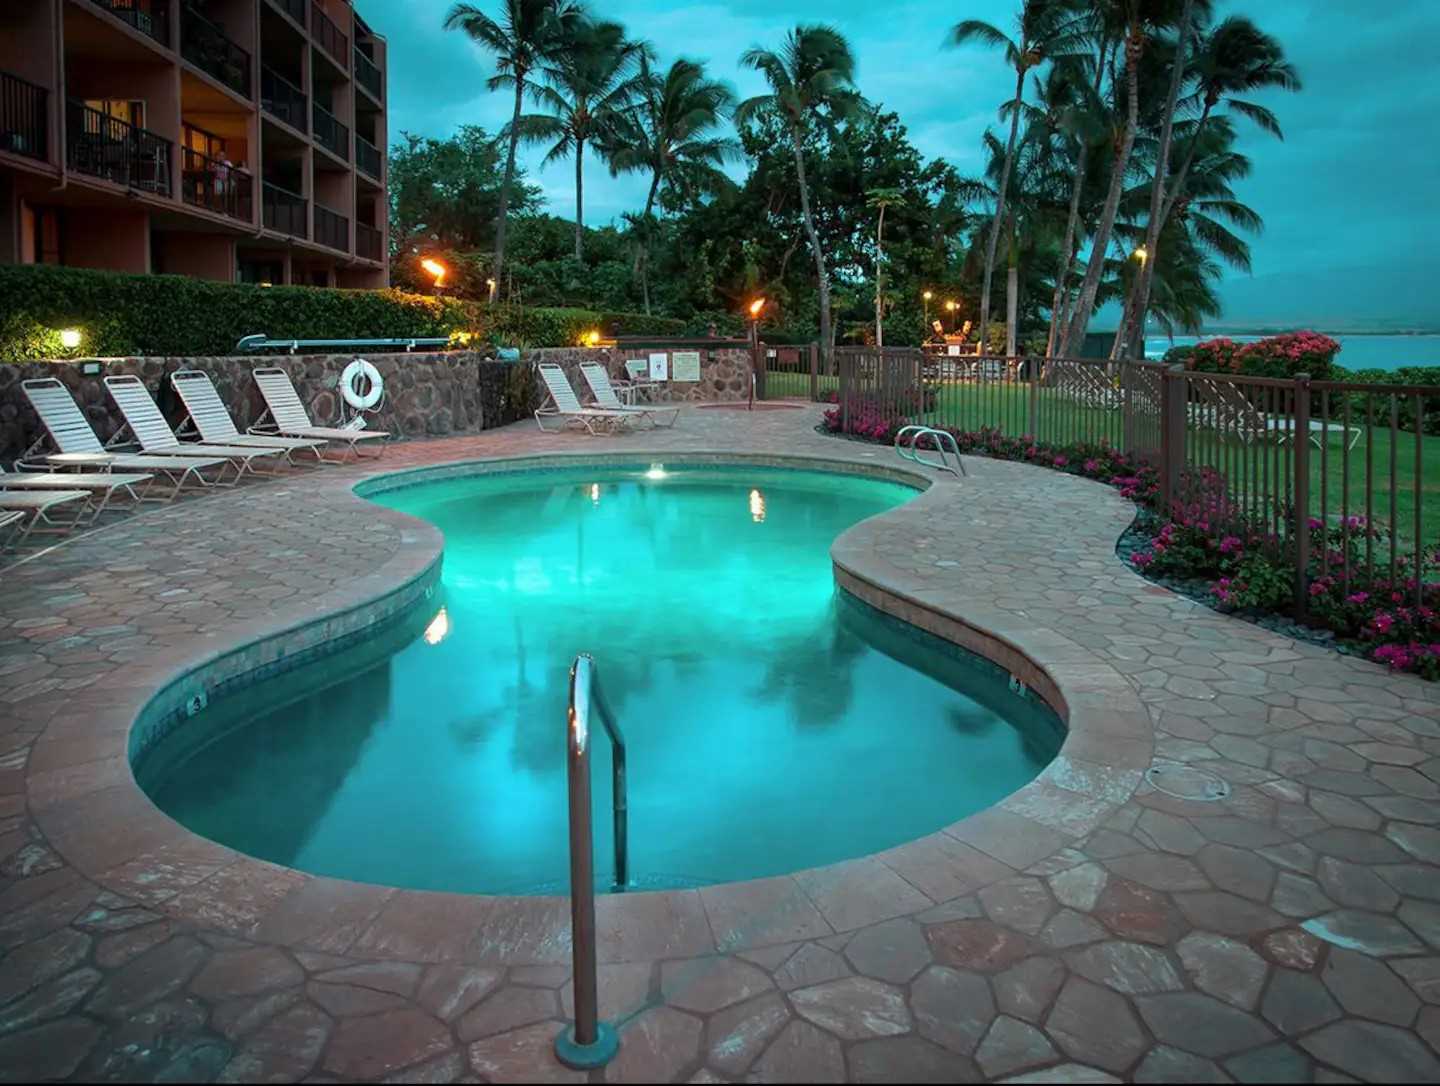 Tiki Pool and Hot tub with garden and ocean views. Pool lit 